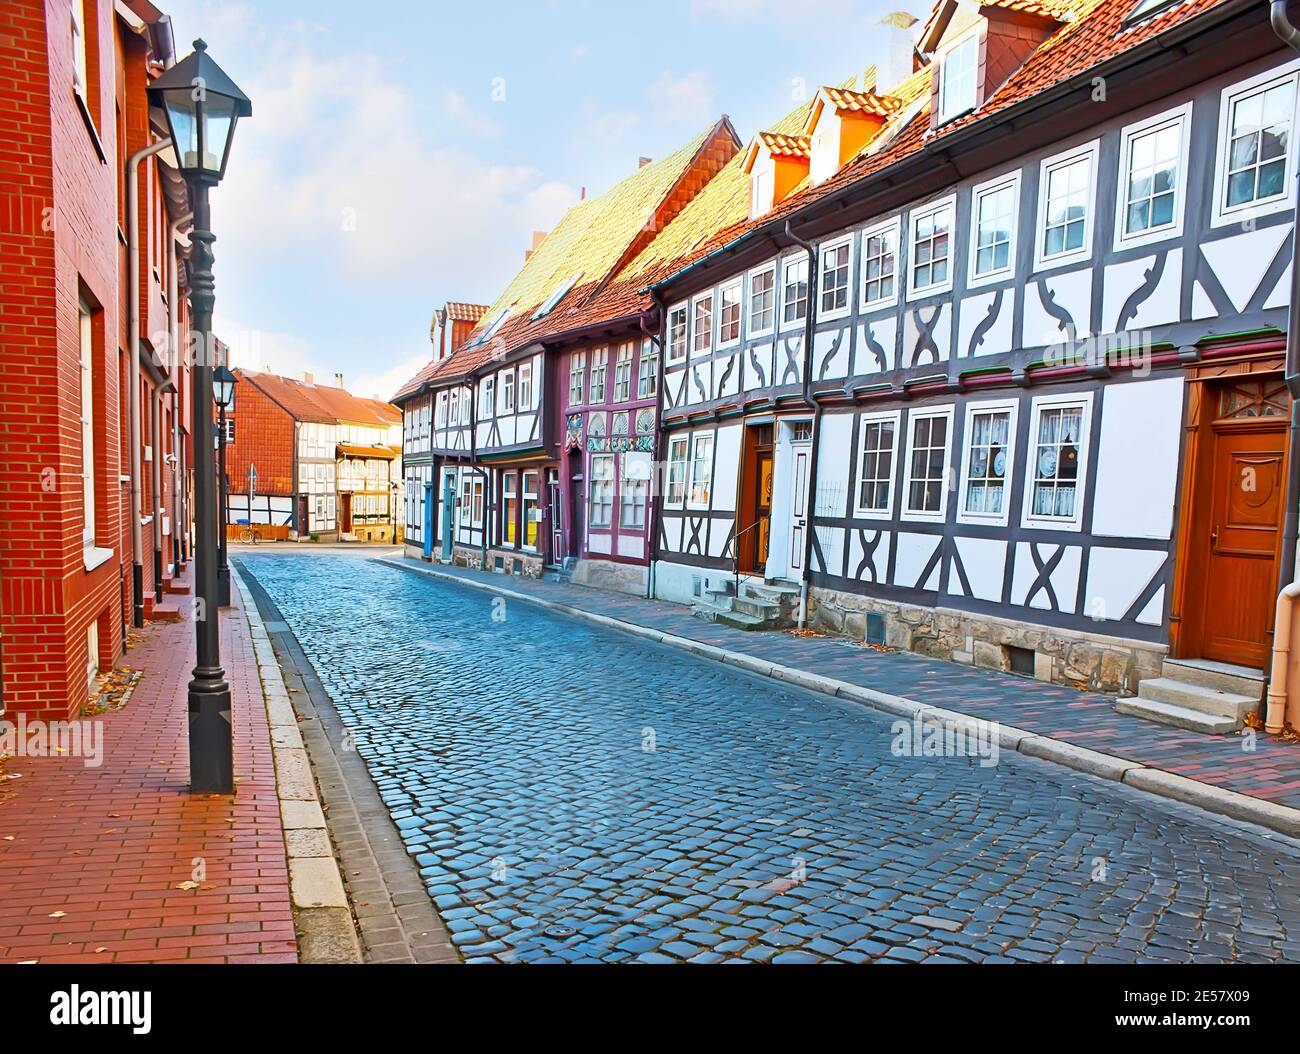 Explore traditional half-timbered houses, walking Gelber Stern street of Hildesheim, Germany Stock Photo